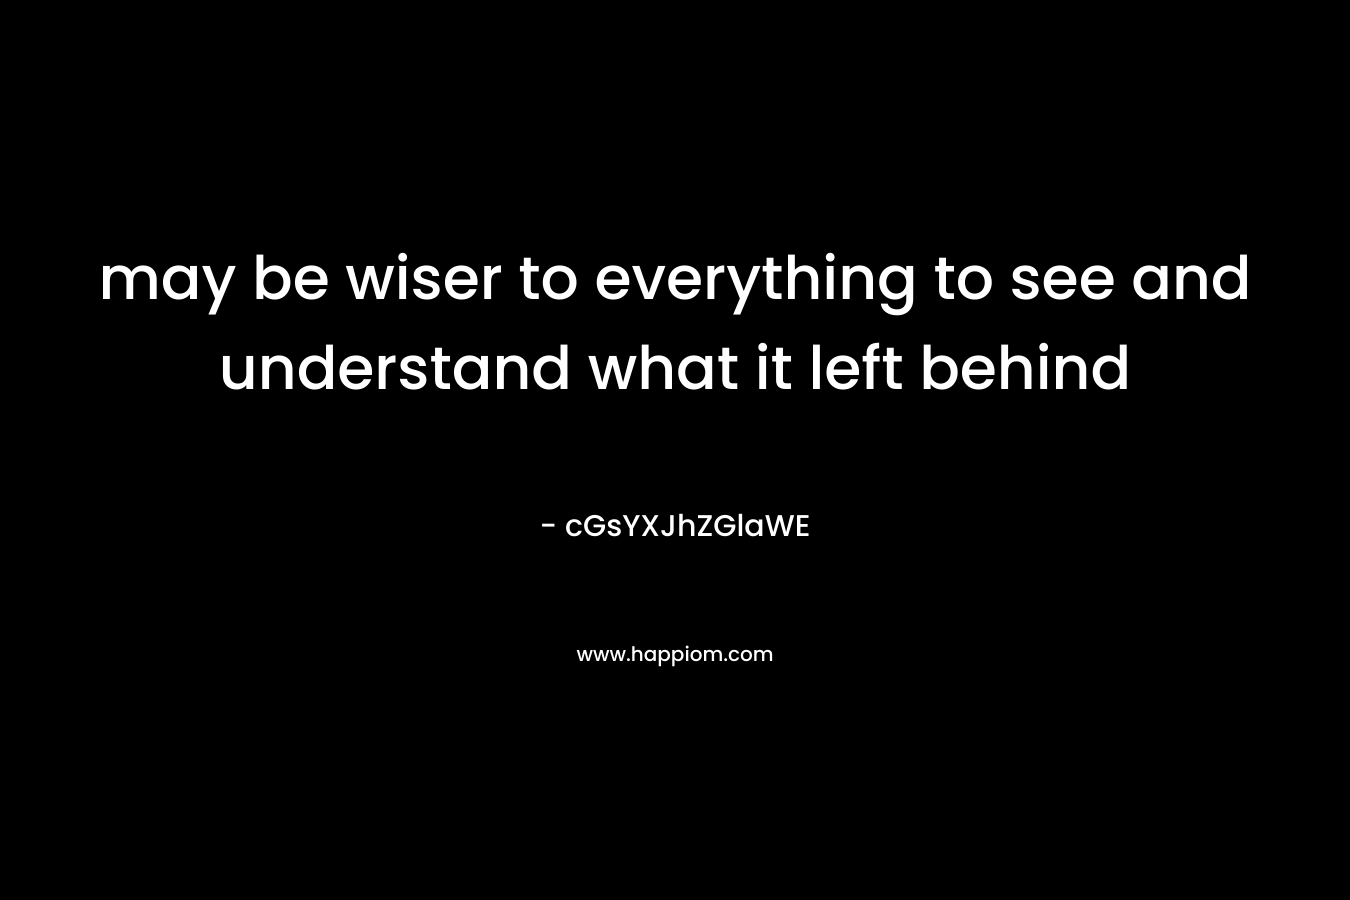 may be wiser to everything to see and understand what it left behind